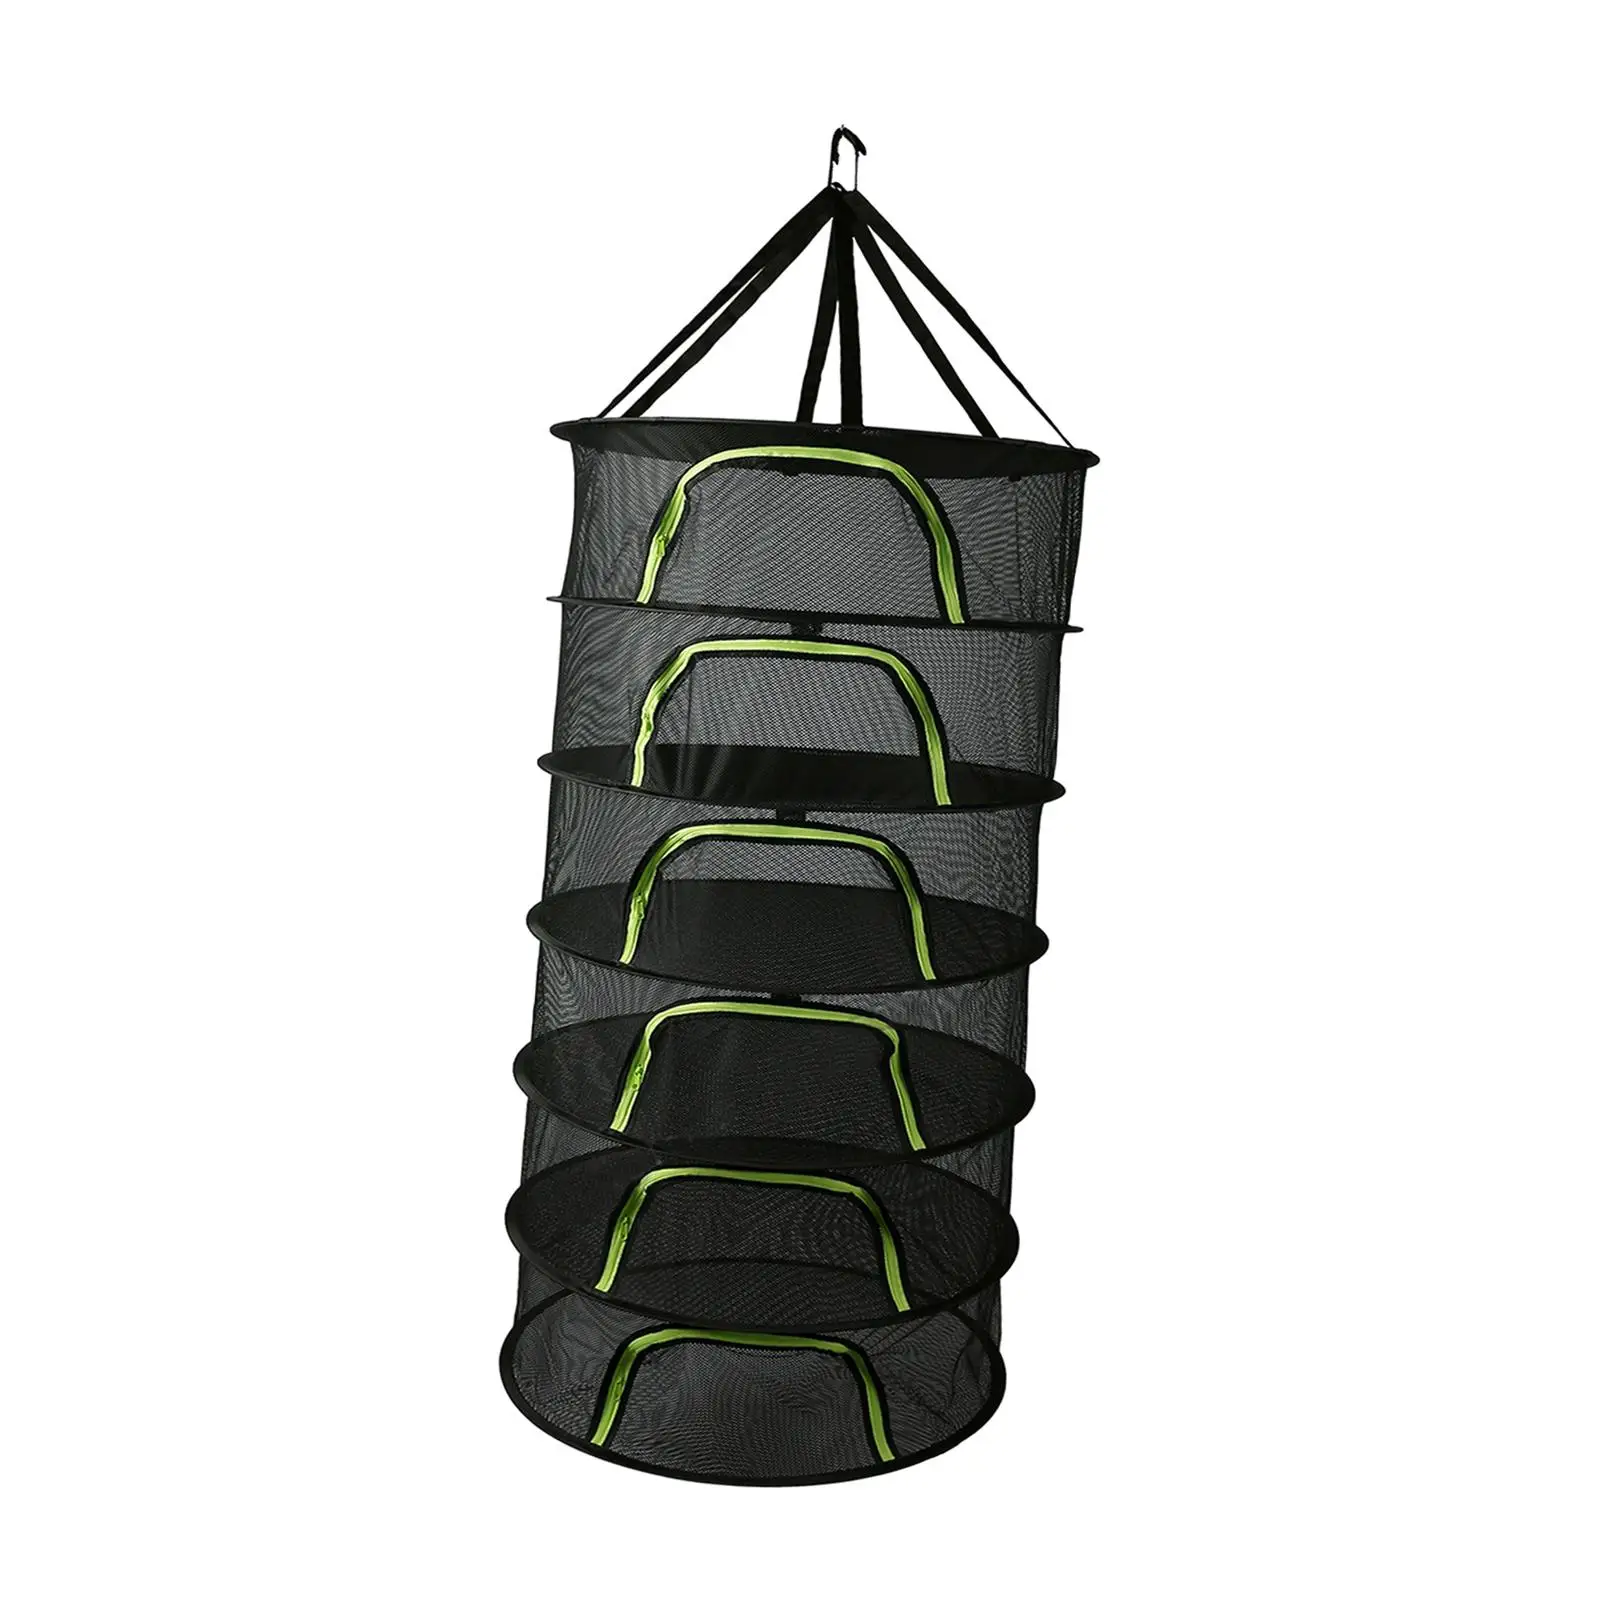 Plants Drying Rack Zippered Folding Breathable Drying Net Mesh Hanging Plant Dryer for Tea Fruits Vegetables Clothes Flowers